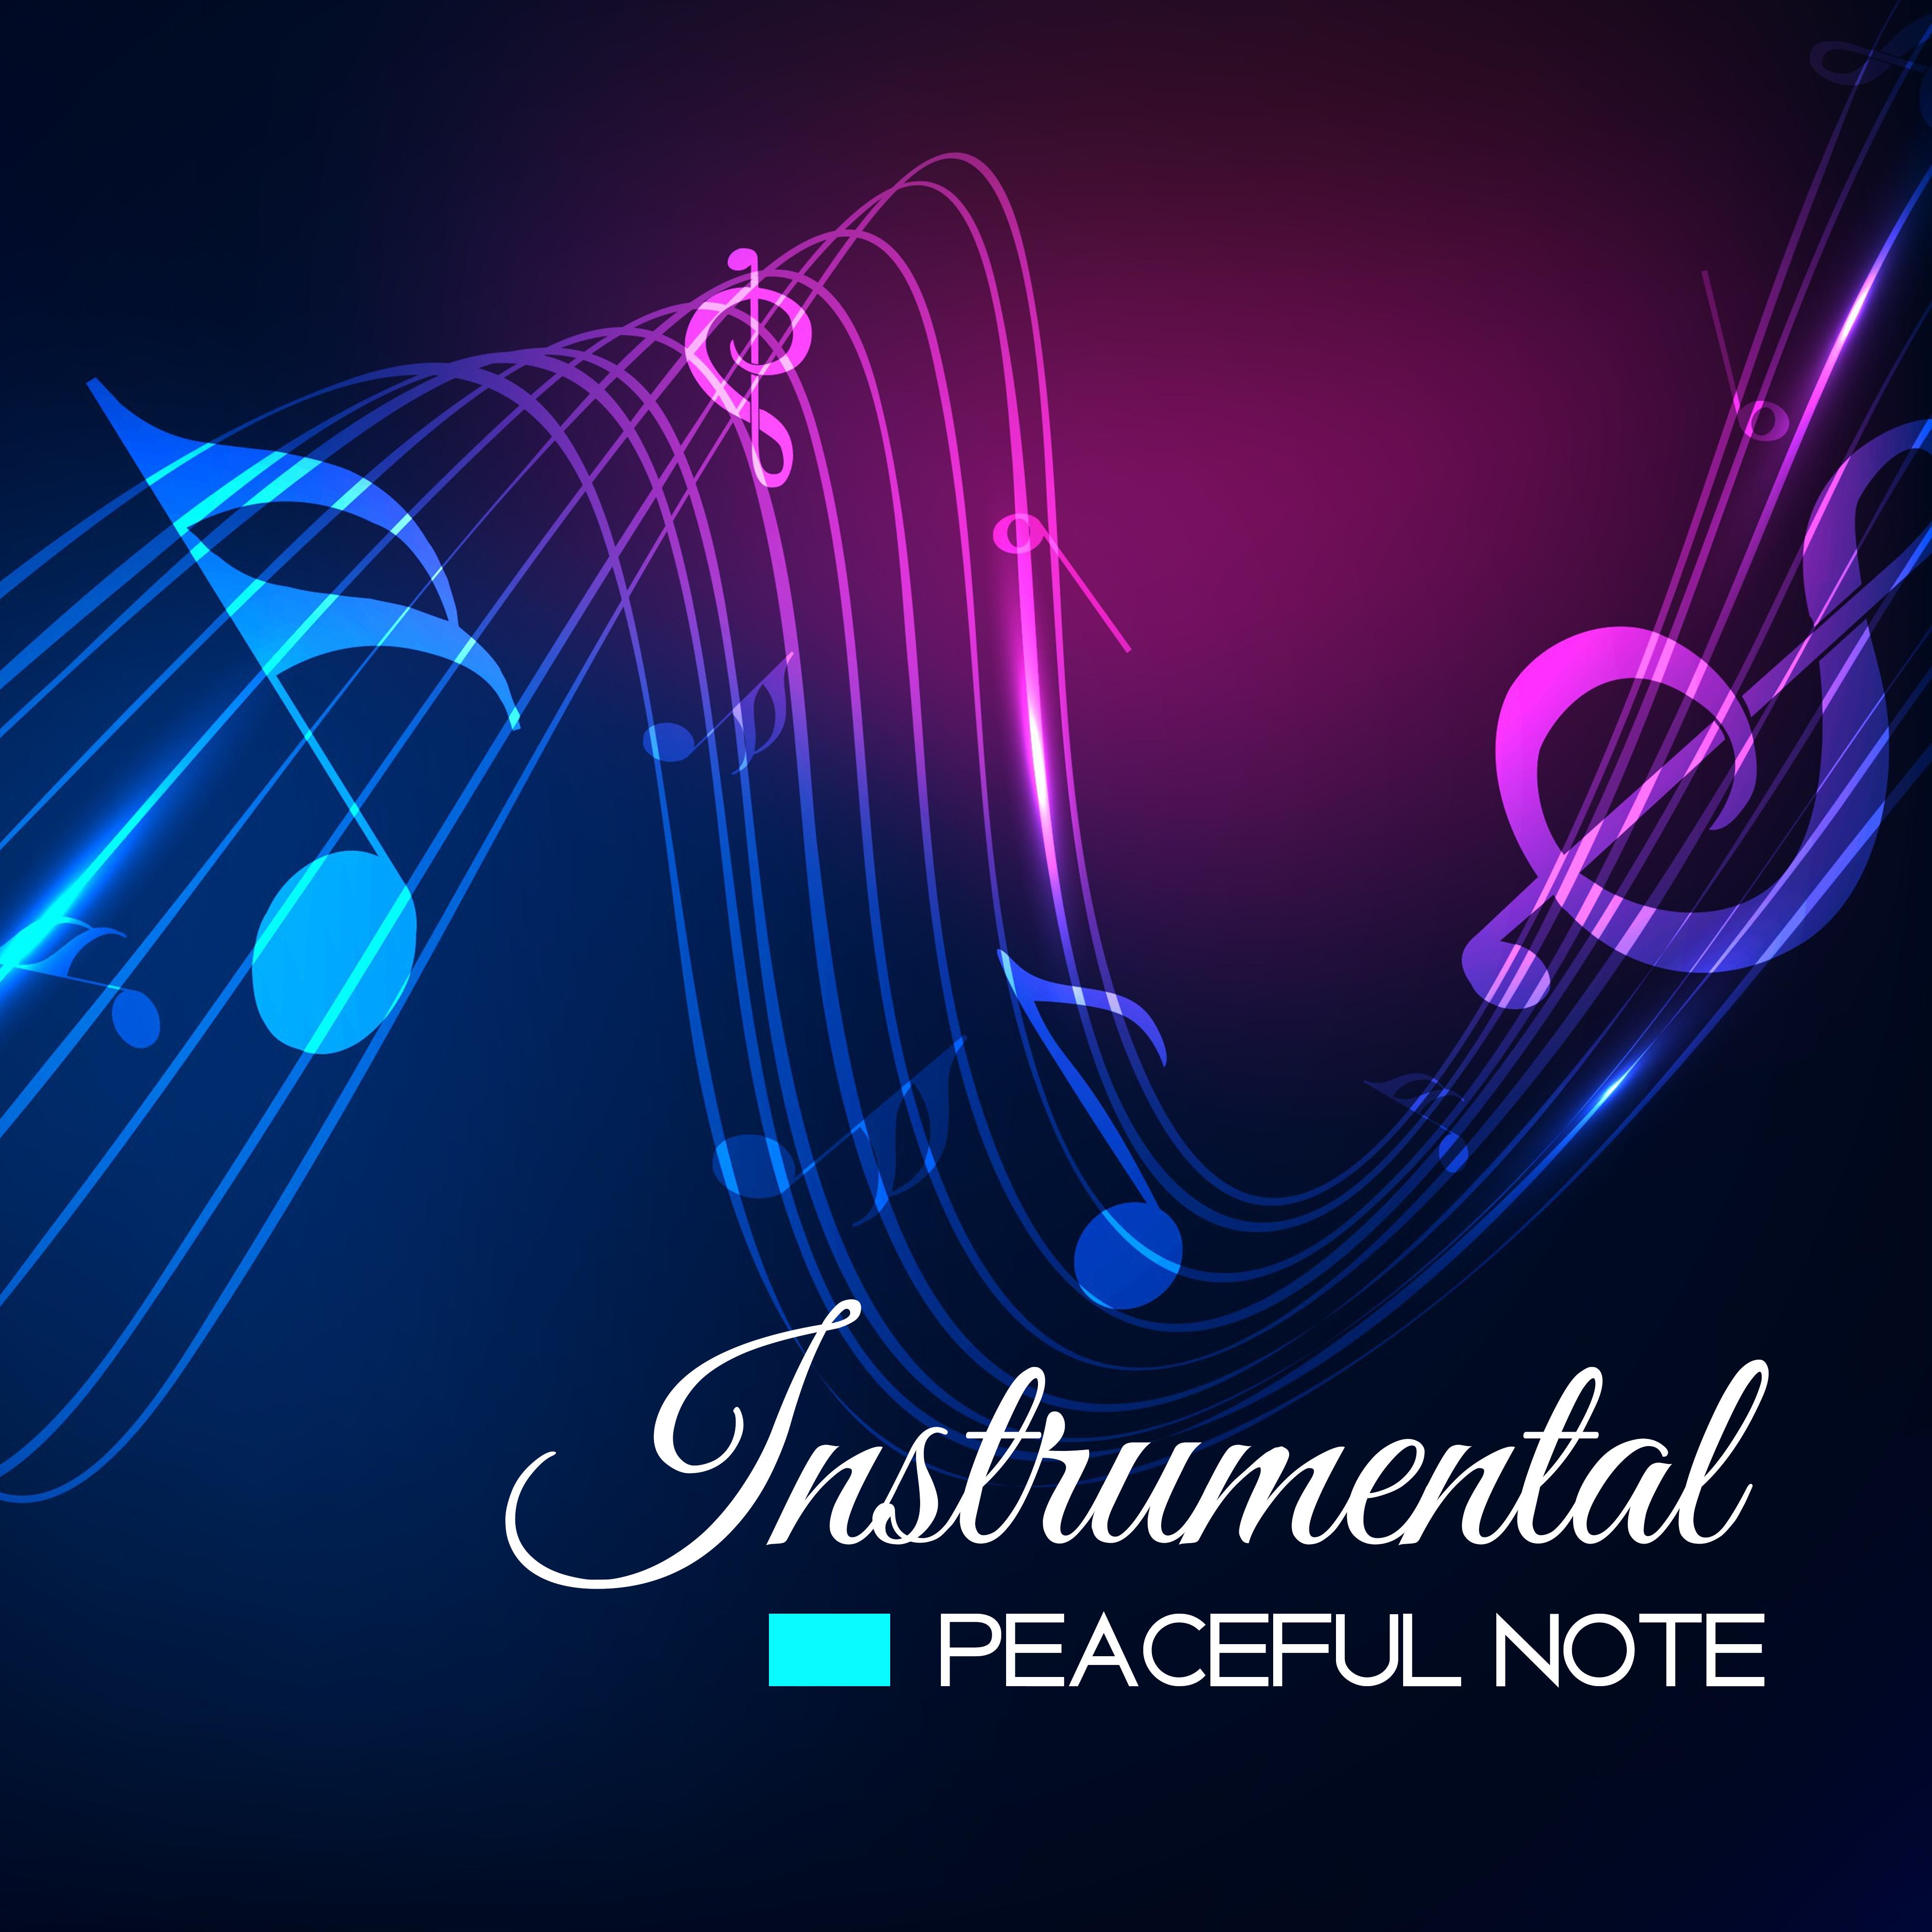 Instrumental Peaceful Note  Easy Listening, Stress Relief, Calm Down  Listen, Smooth Piano, Moonlight Jazz